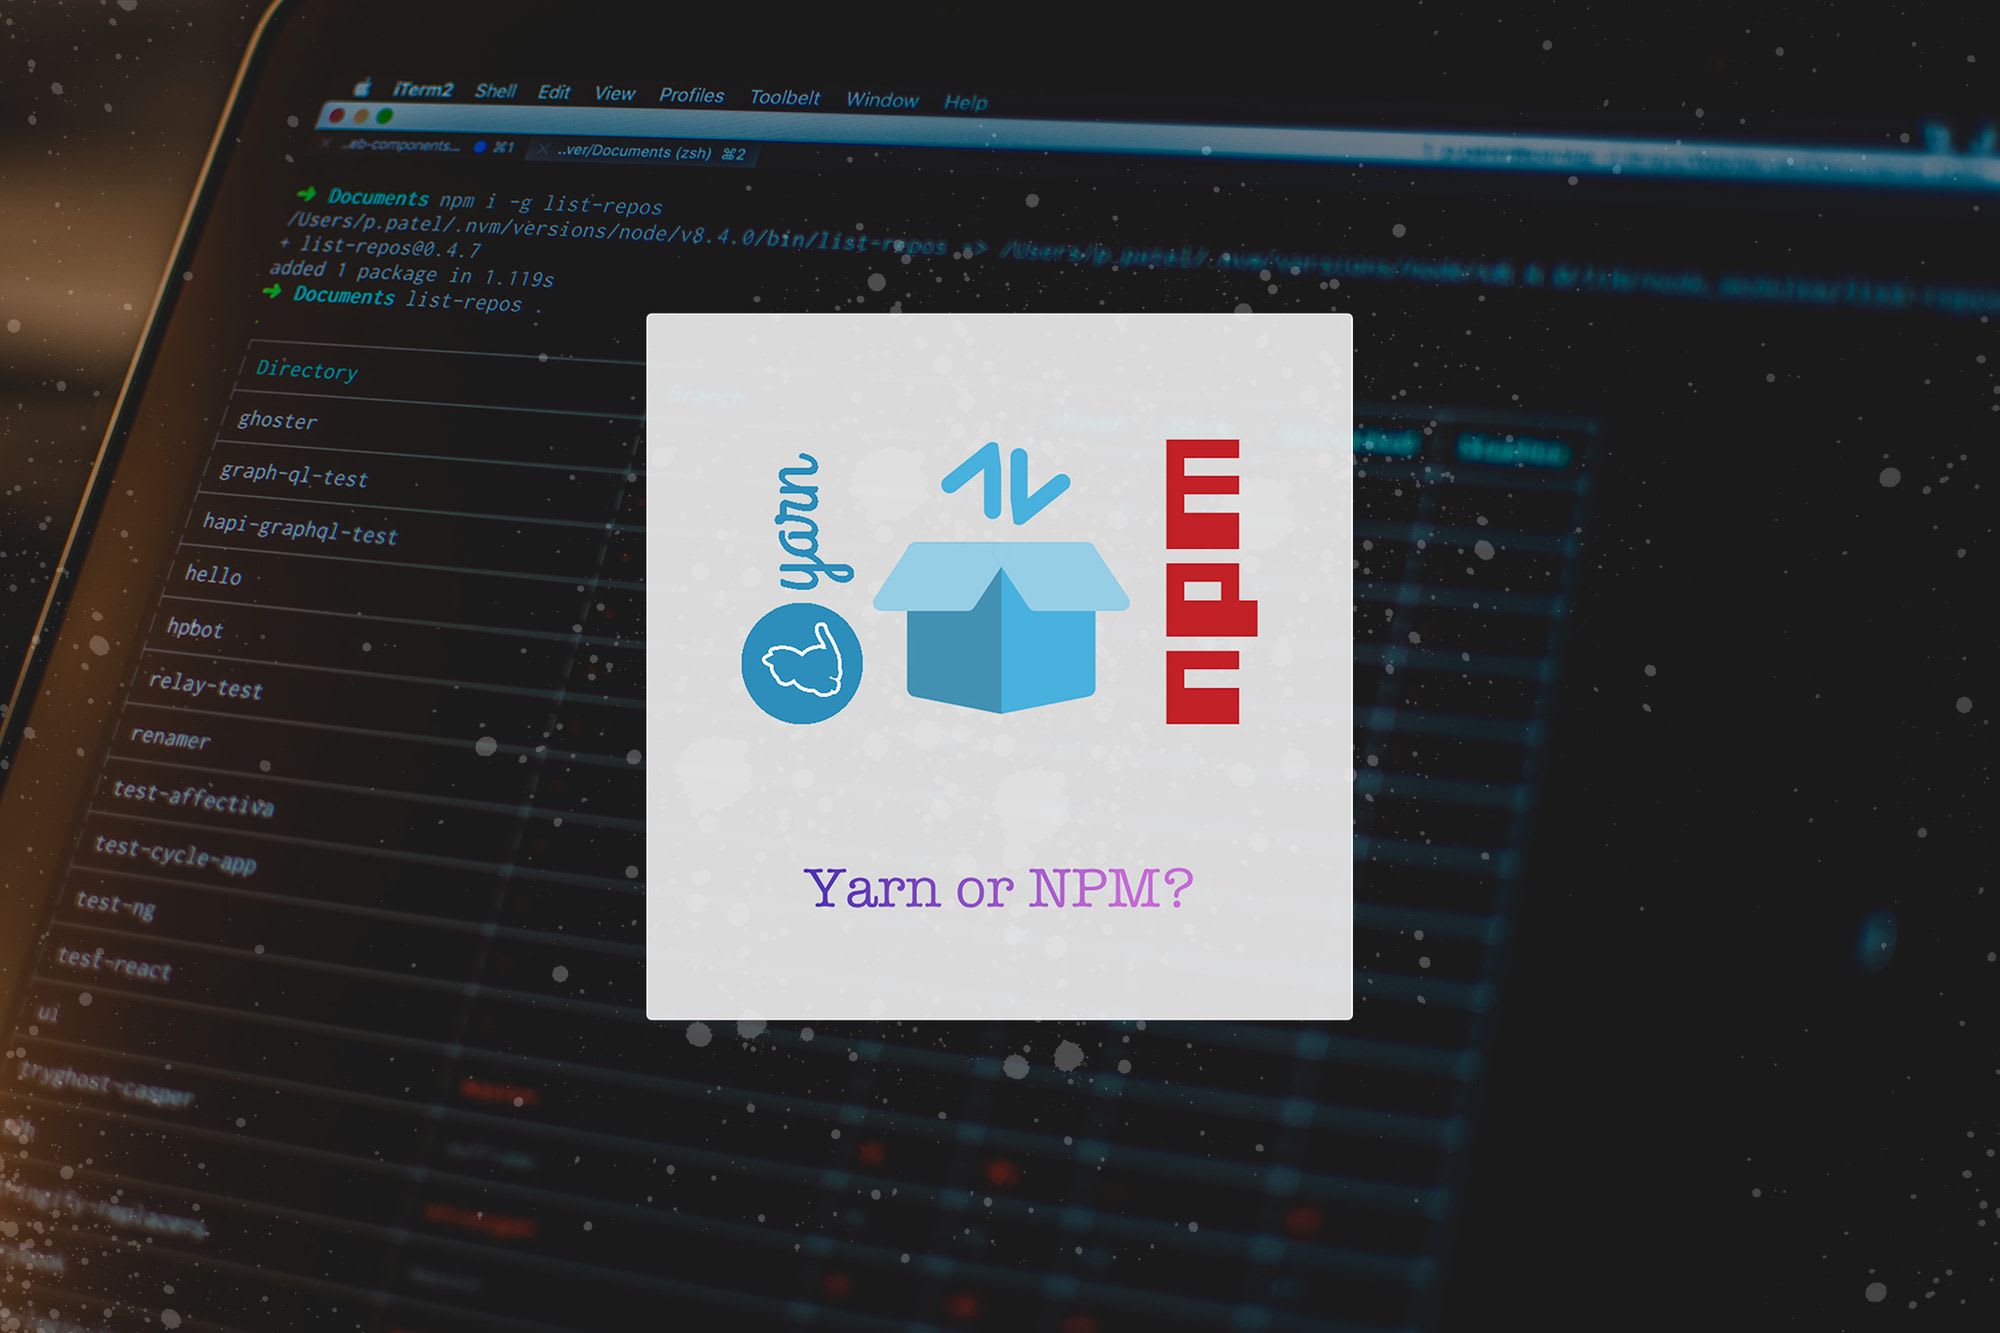 Yarn or npm: What's your preferred package manager?